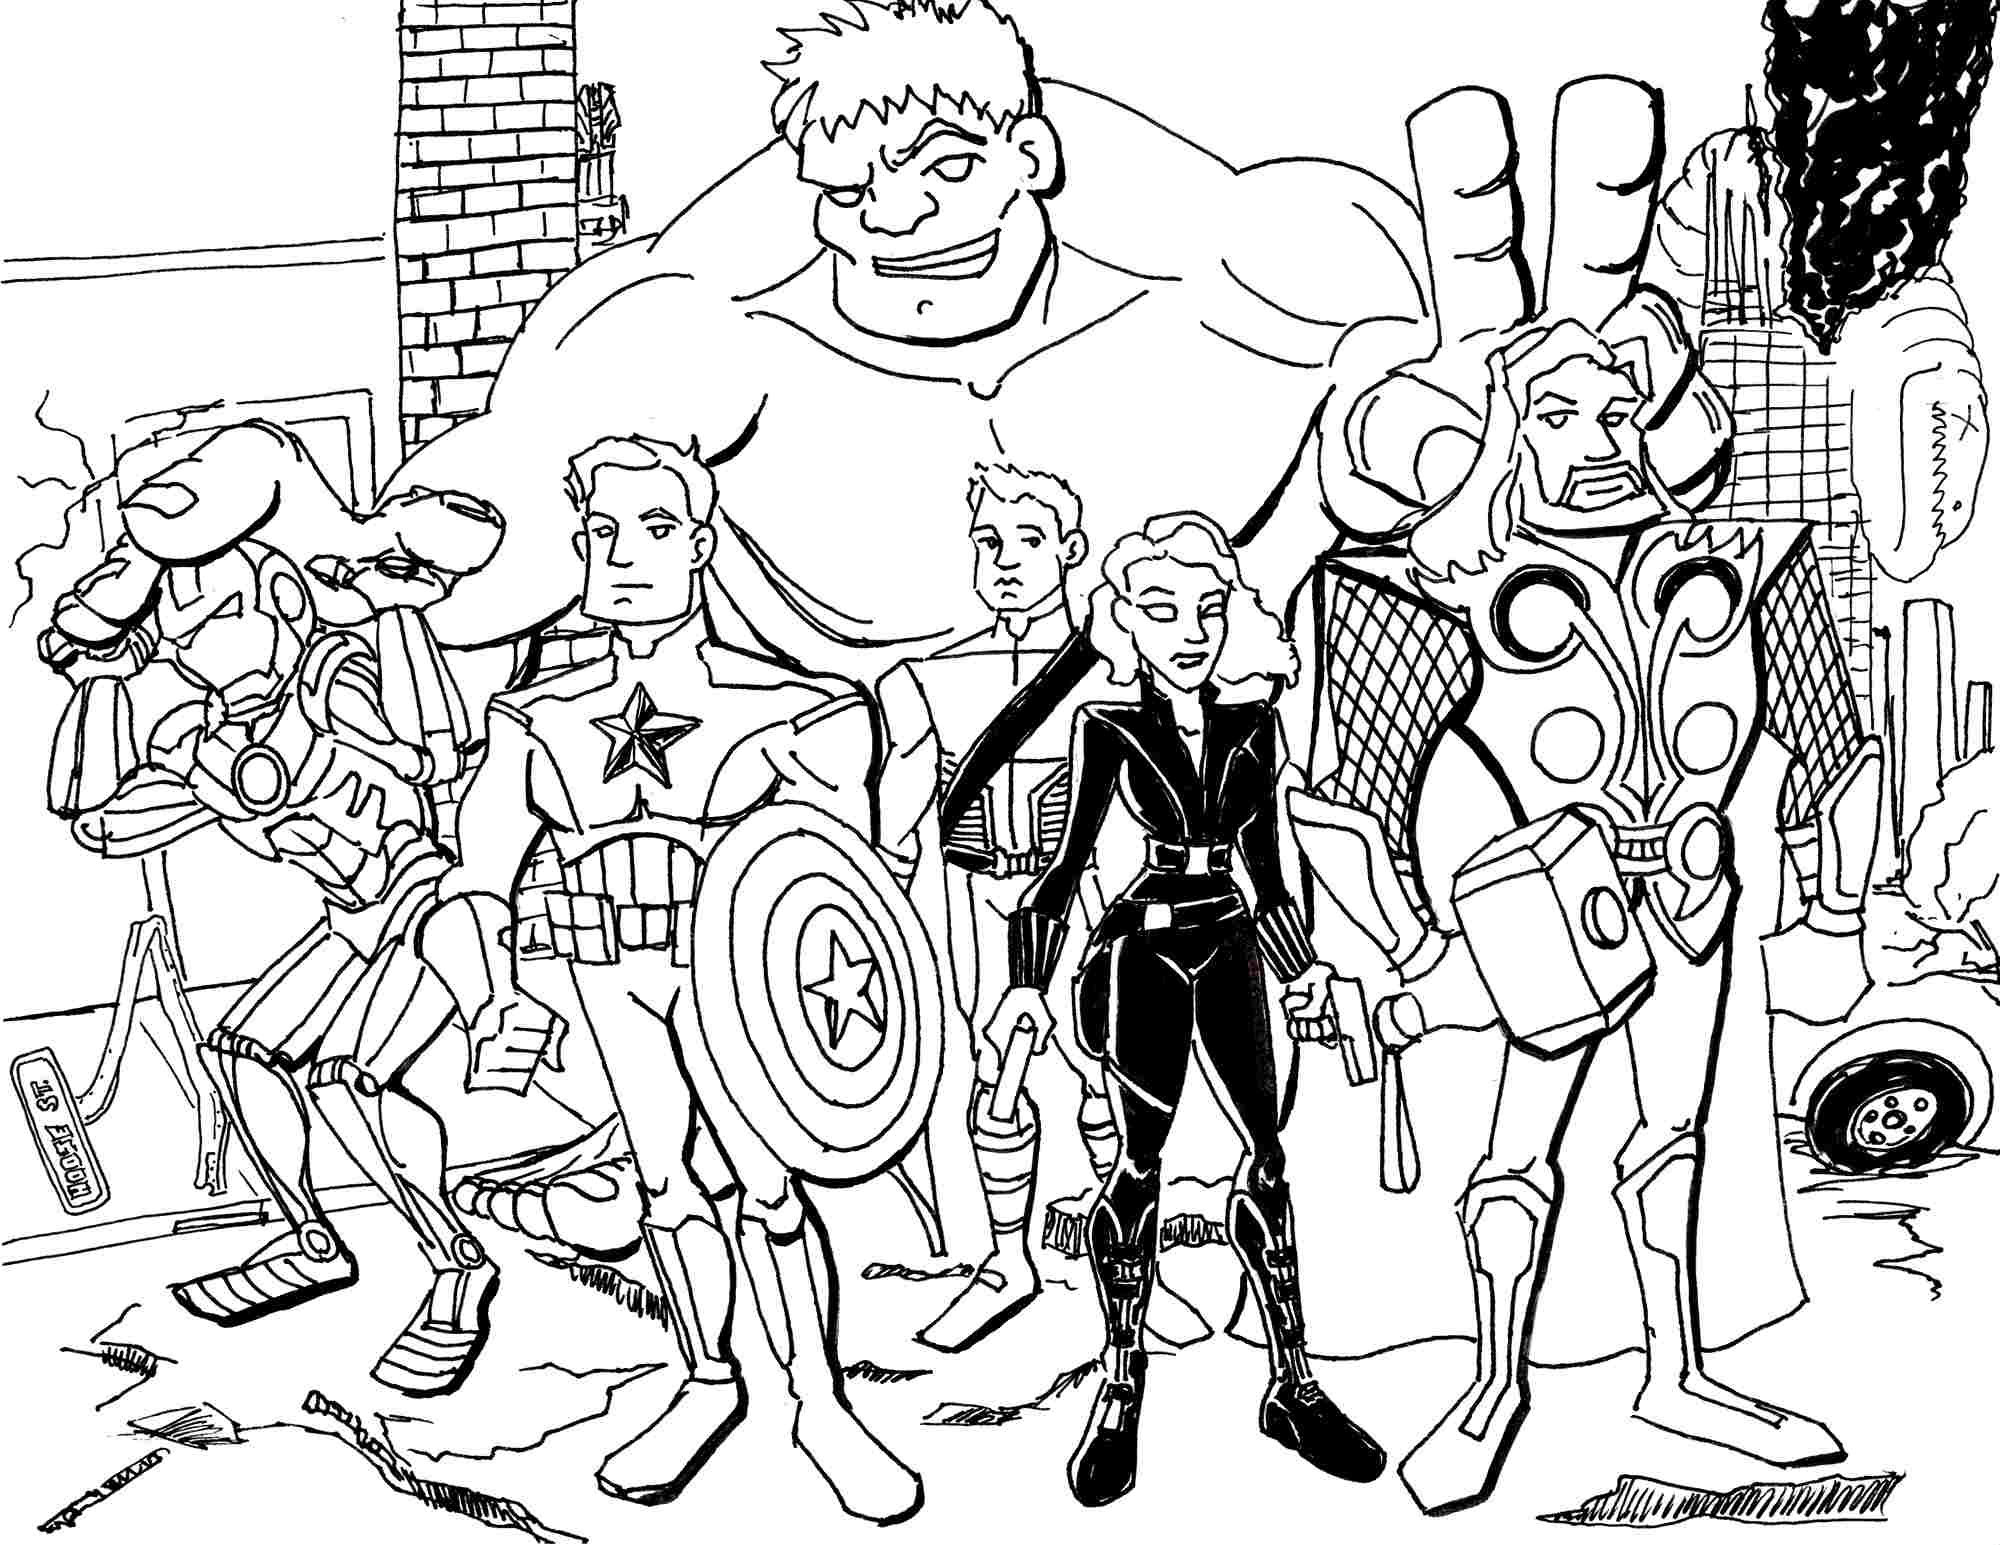 Drawing Avengers #74212 (Superheroes) – Printable coloring pages